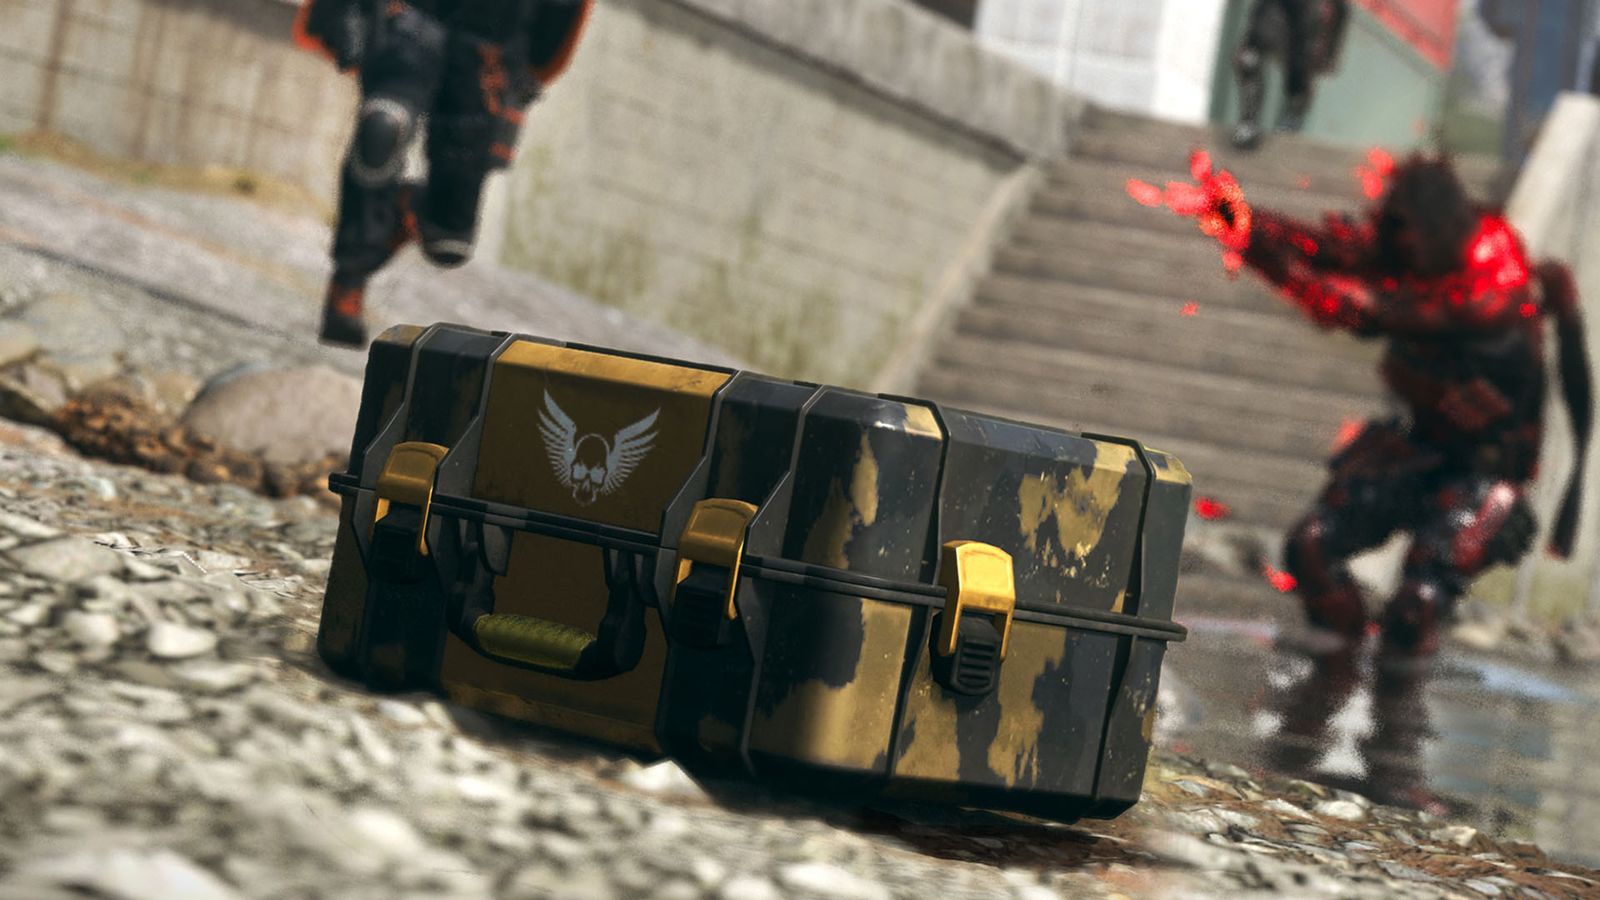 Warzone weapon case with player wearing red Operator skin in background